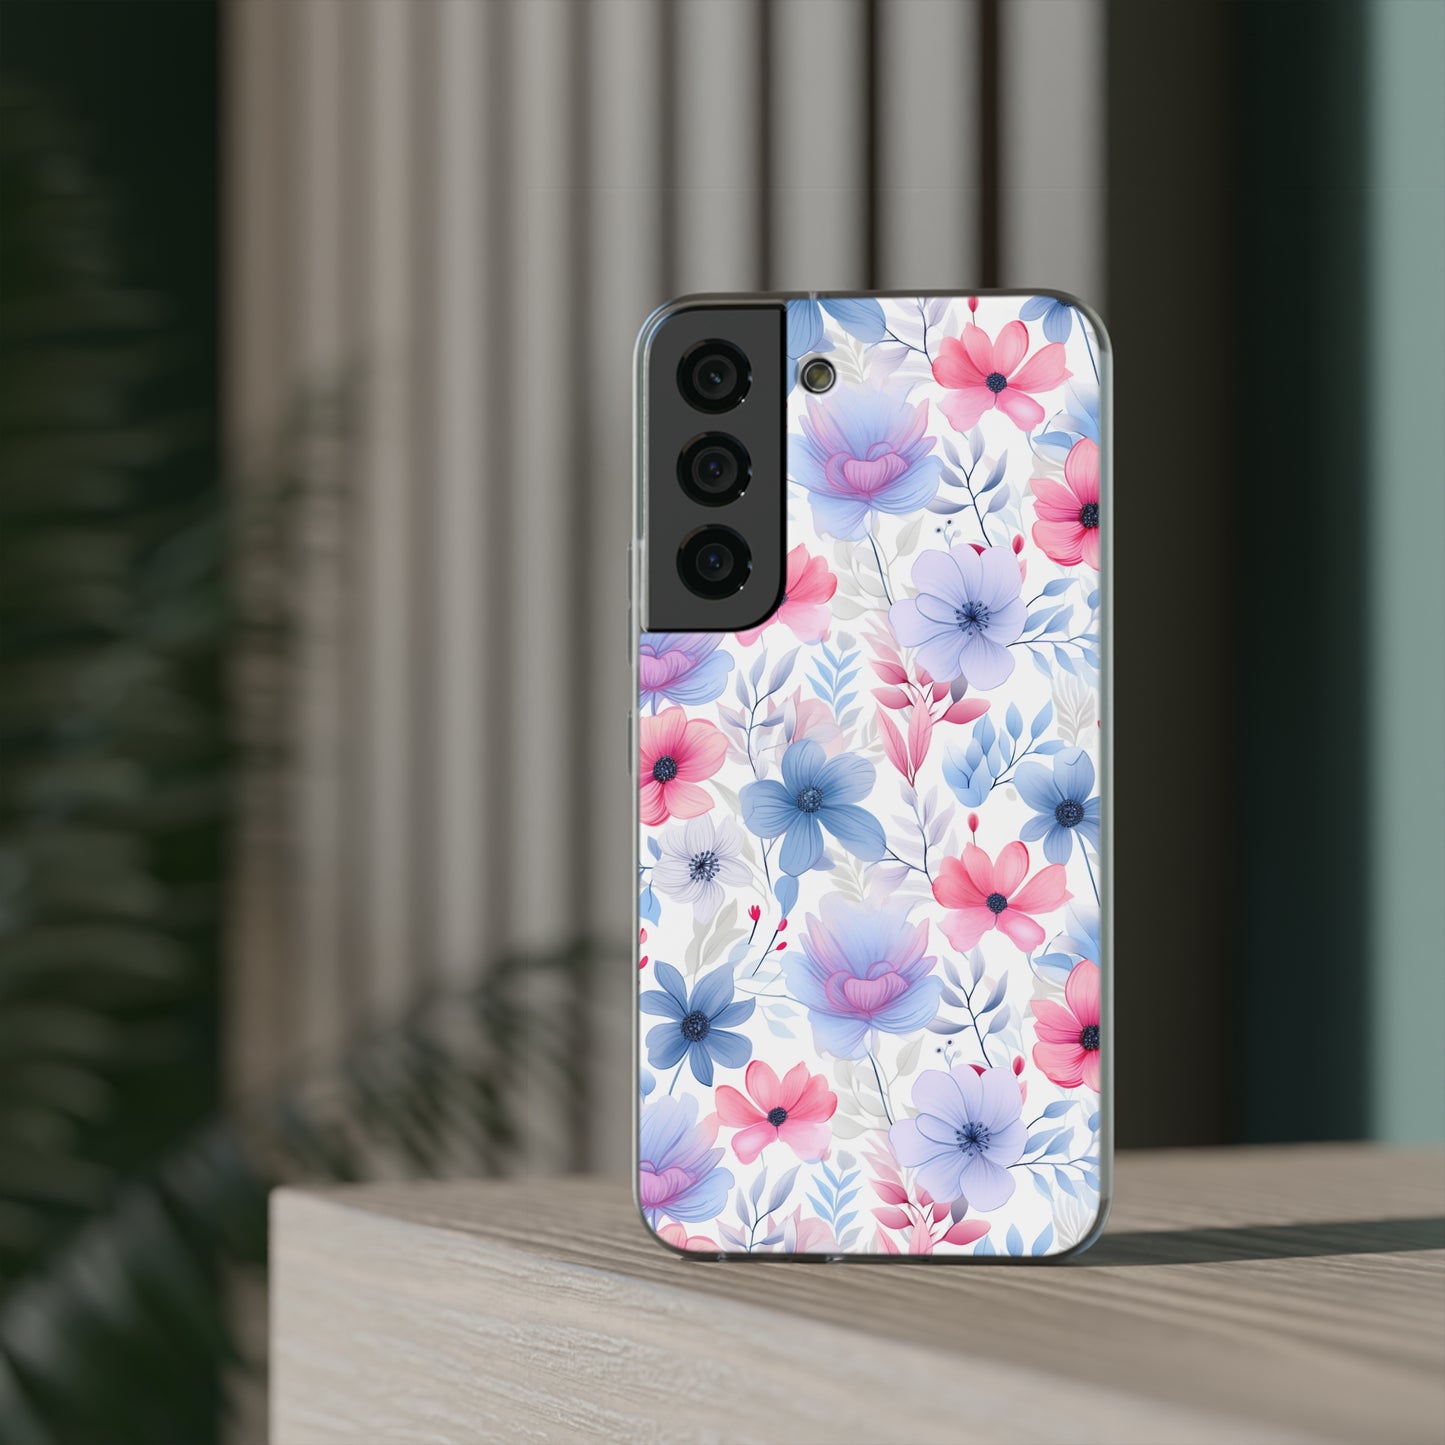 Floral Whispers - Soft Hues of Violets, Pinks, and Blues - Flexi Phone Case Phone Case Pattern Symphony Samsung Galaxy S22  